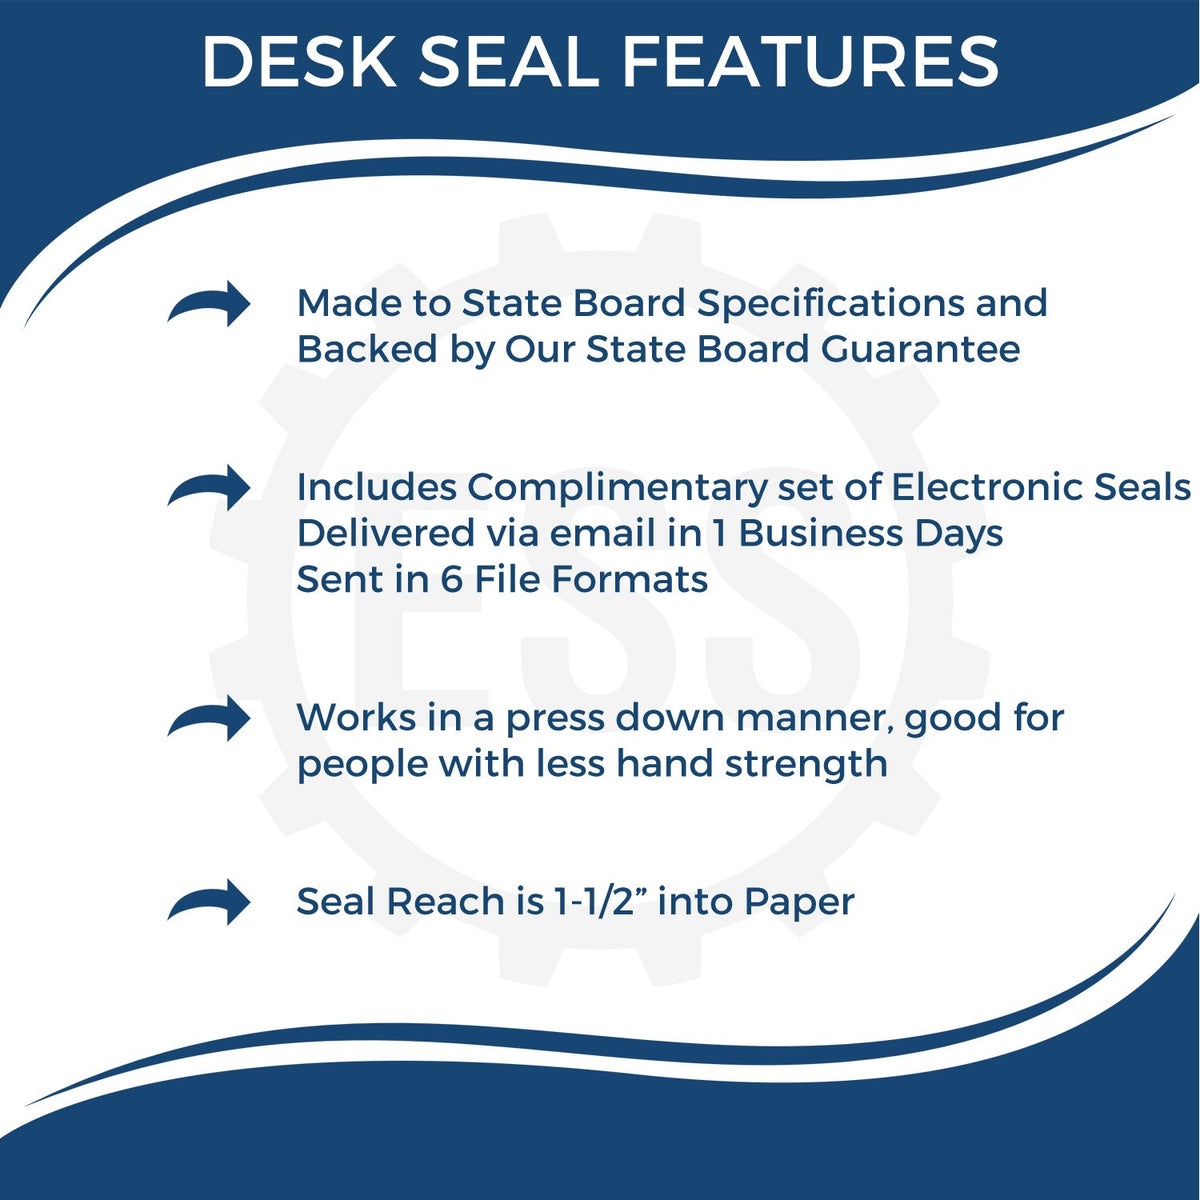 A picture of an infographic highlighting the selling points for the South Dakota Geologist Desk Seal